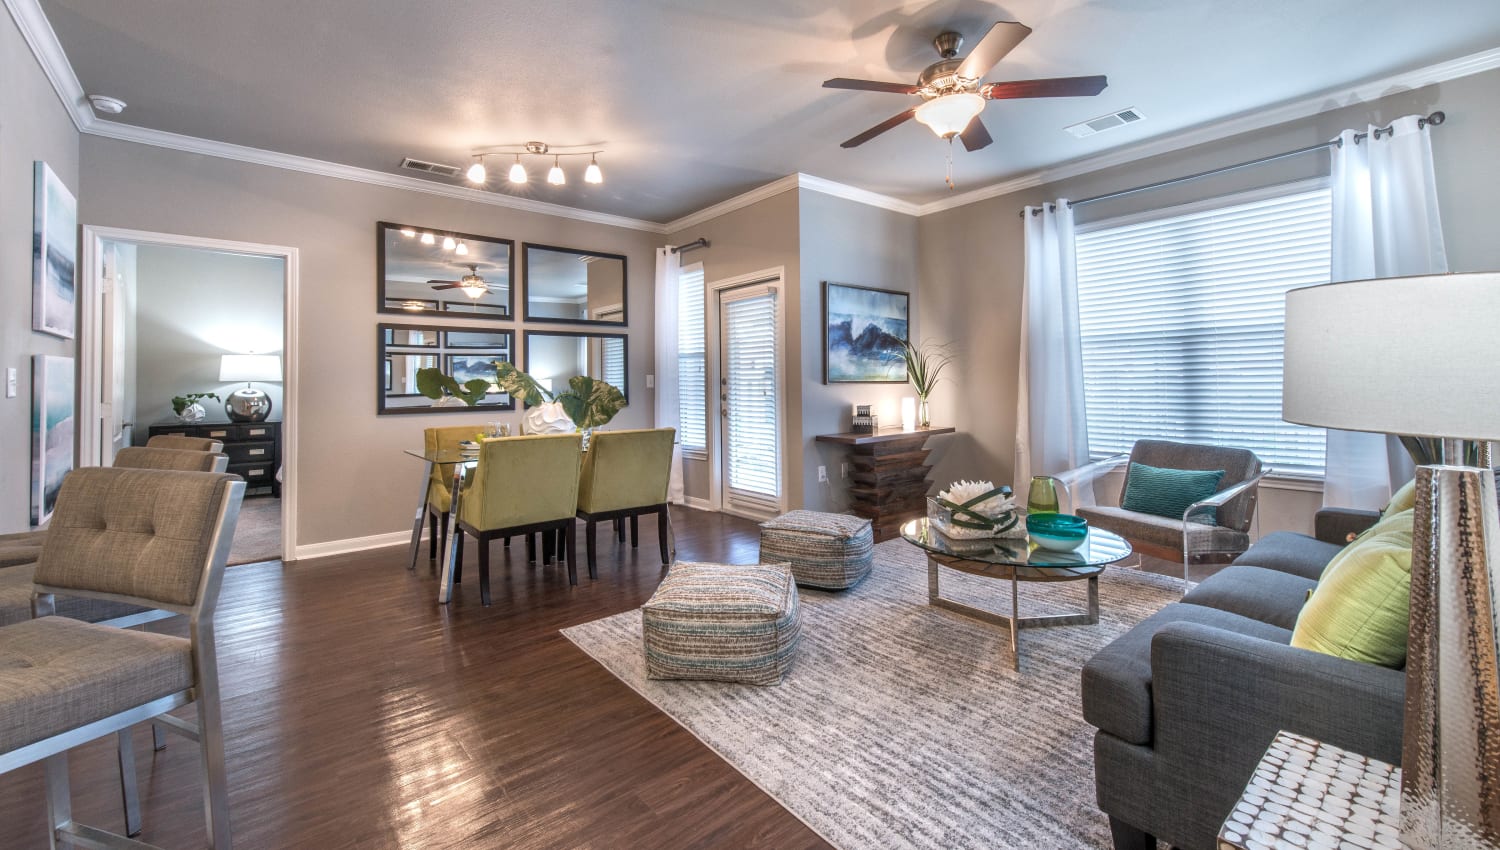 Bay windows and a ceiling fan in the living area of a model home at Olympus Las Colinas in Irving, Texas